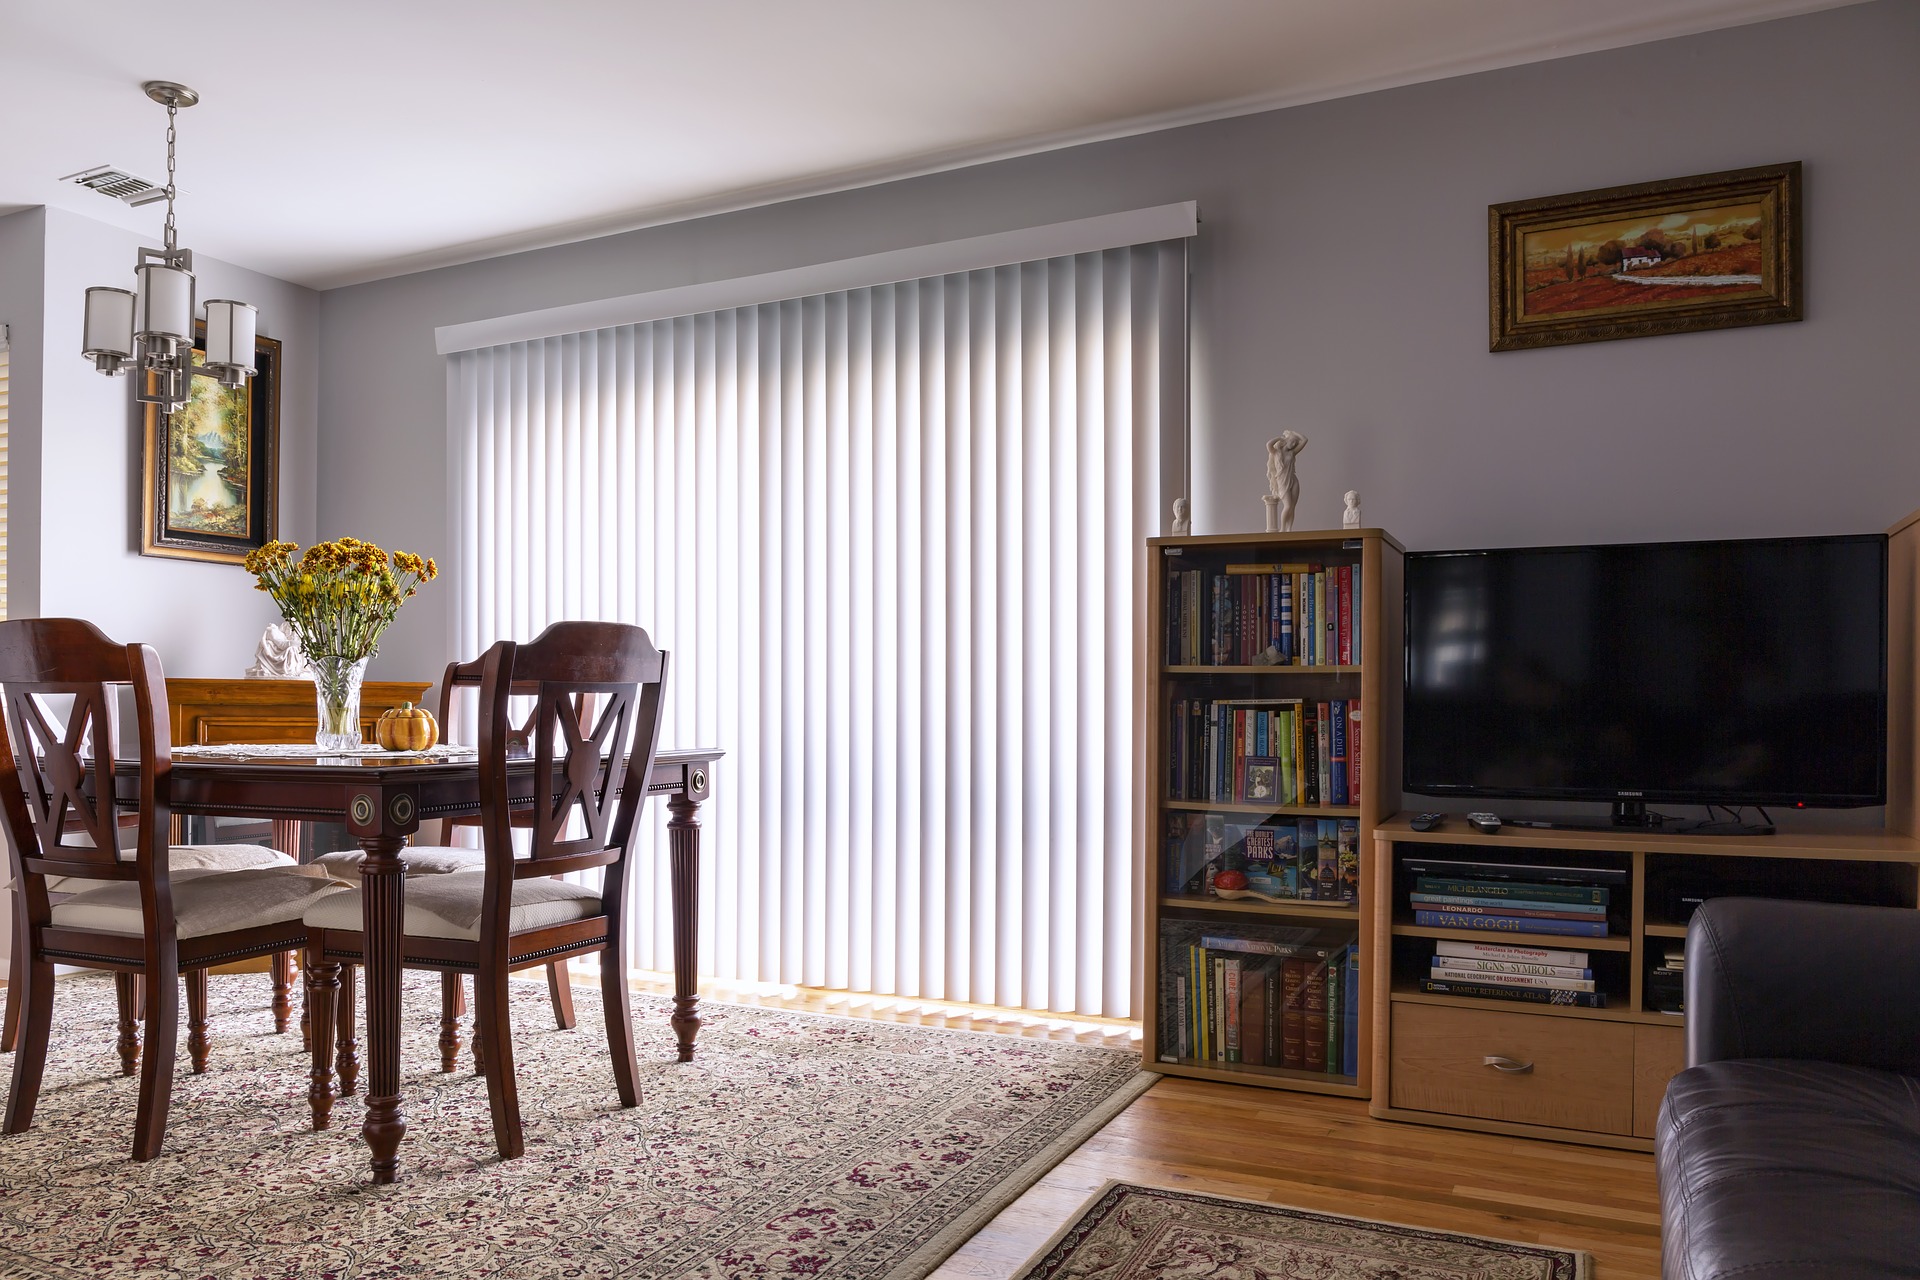 Home Interior with window blinds